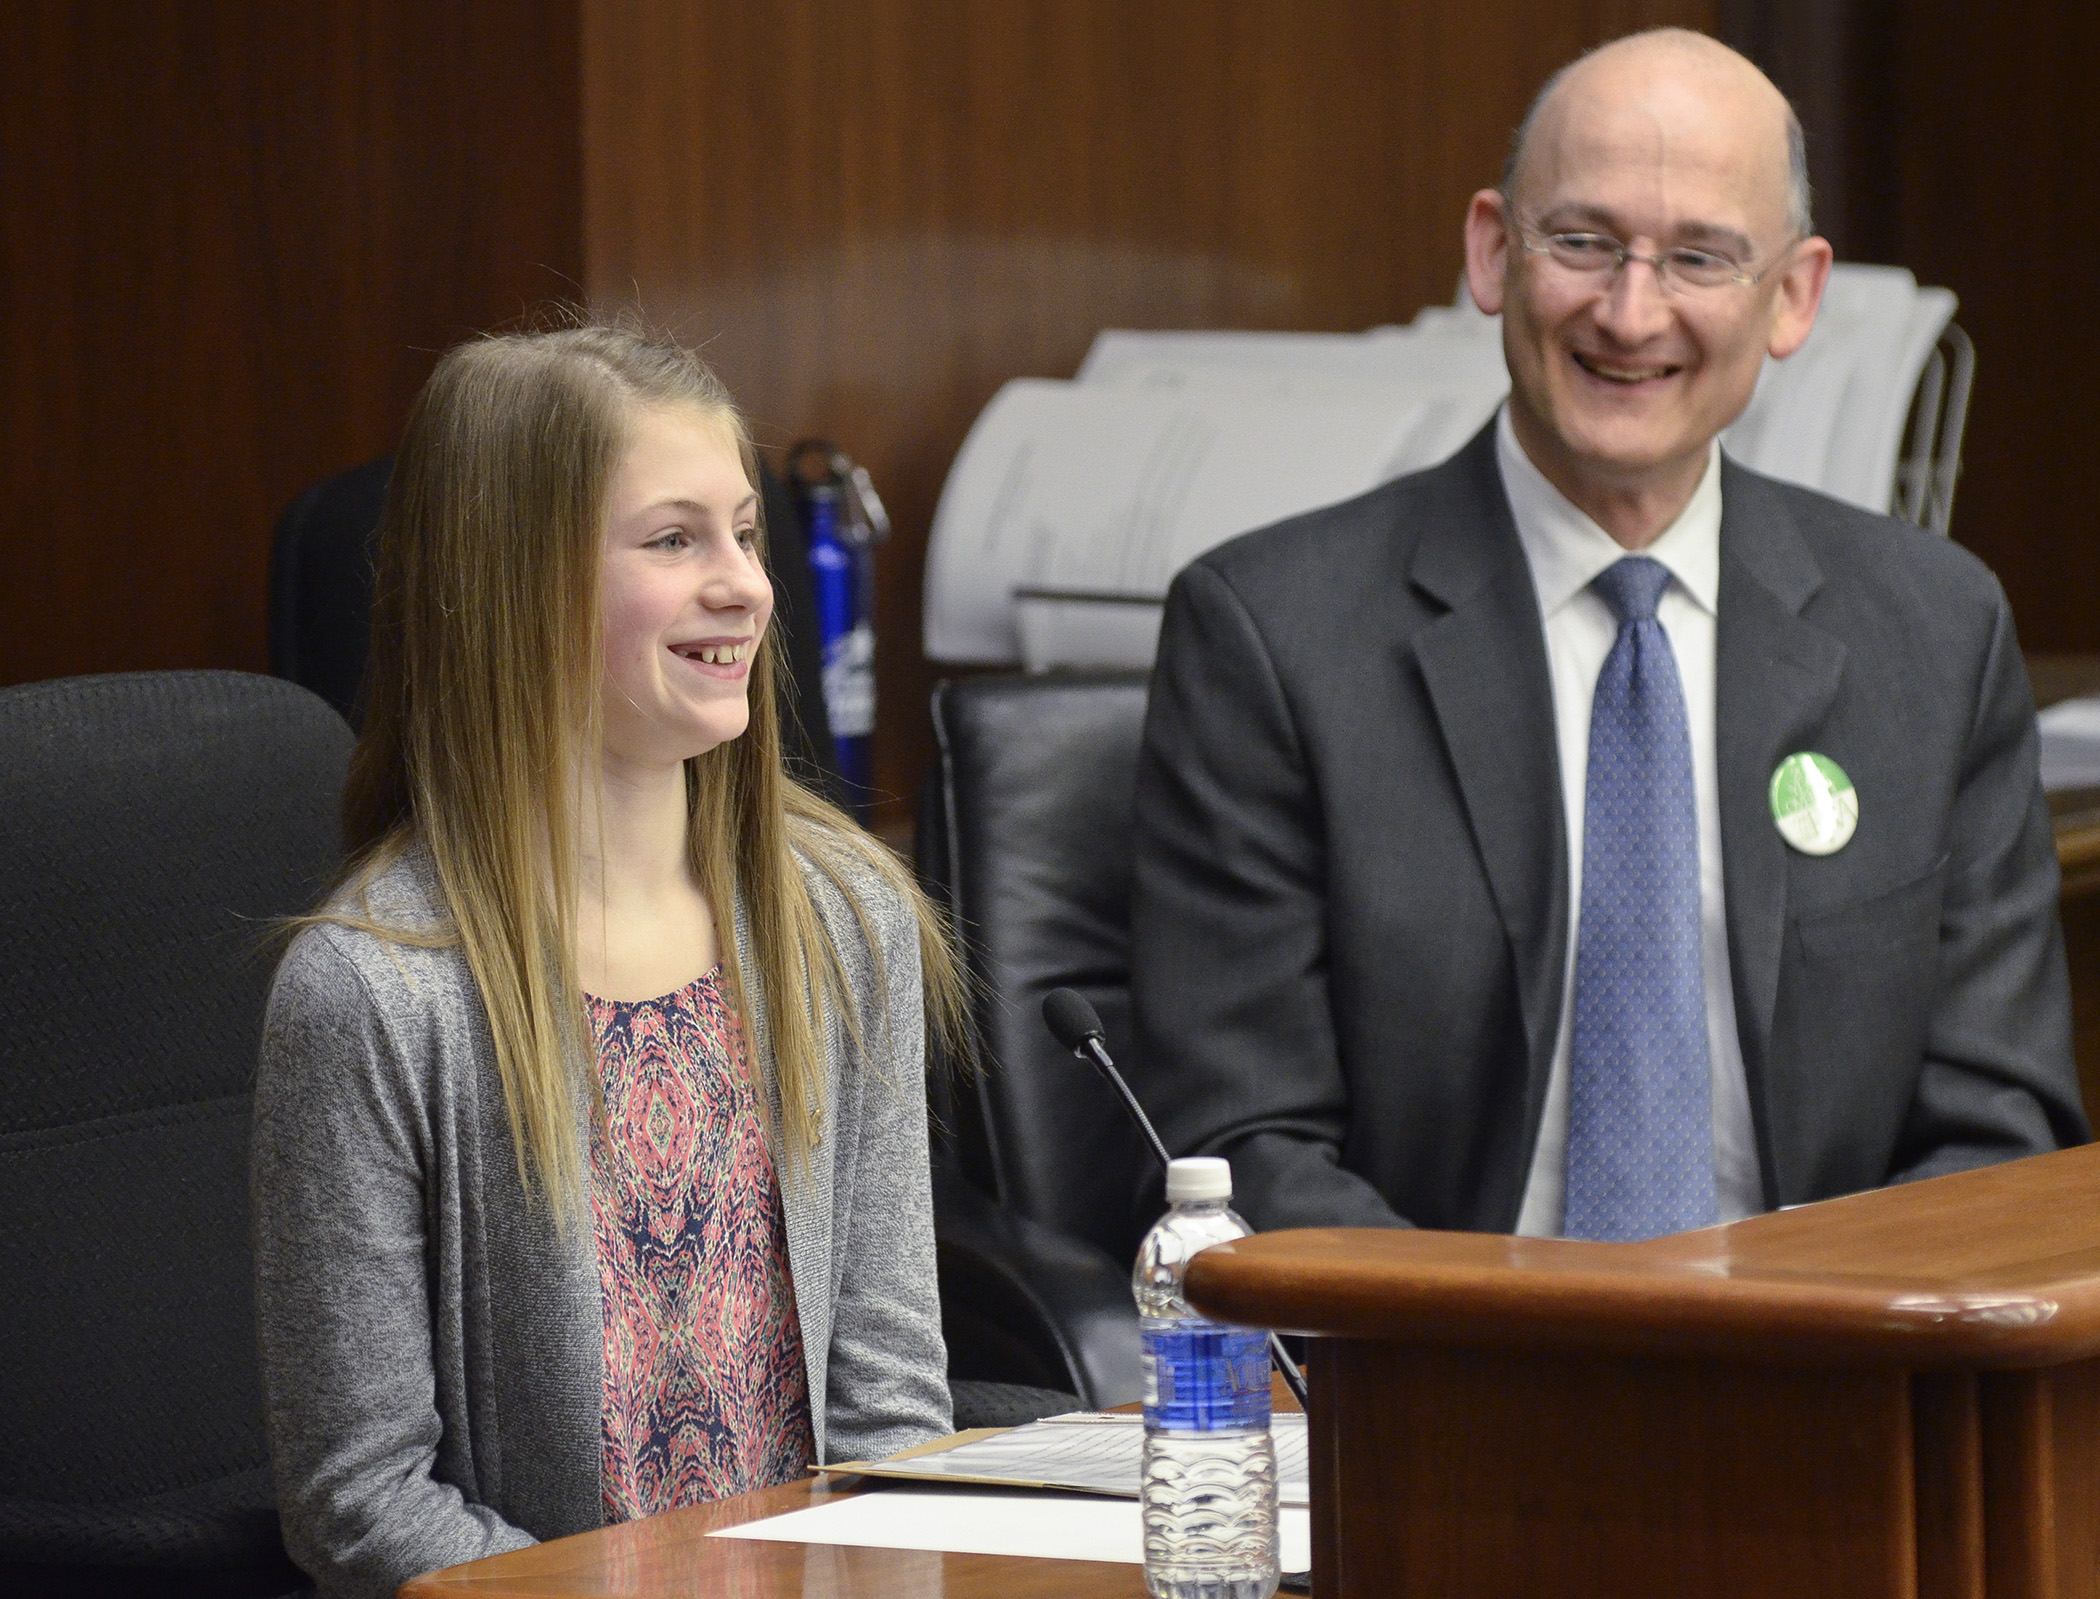 Sophie Davis, 12, a student at Sunrise Park Middle School in White Bear Lake, testifies before the House Education Finance Committee March 5 in support of a bill sponsored by Rep. Peter Fischer, right, that would provide grant funding for water conservation programming in Minnesota schools. Photo by Andrew VonBank